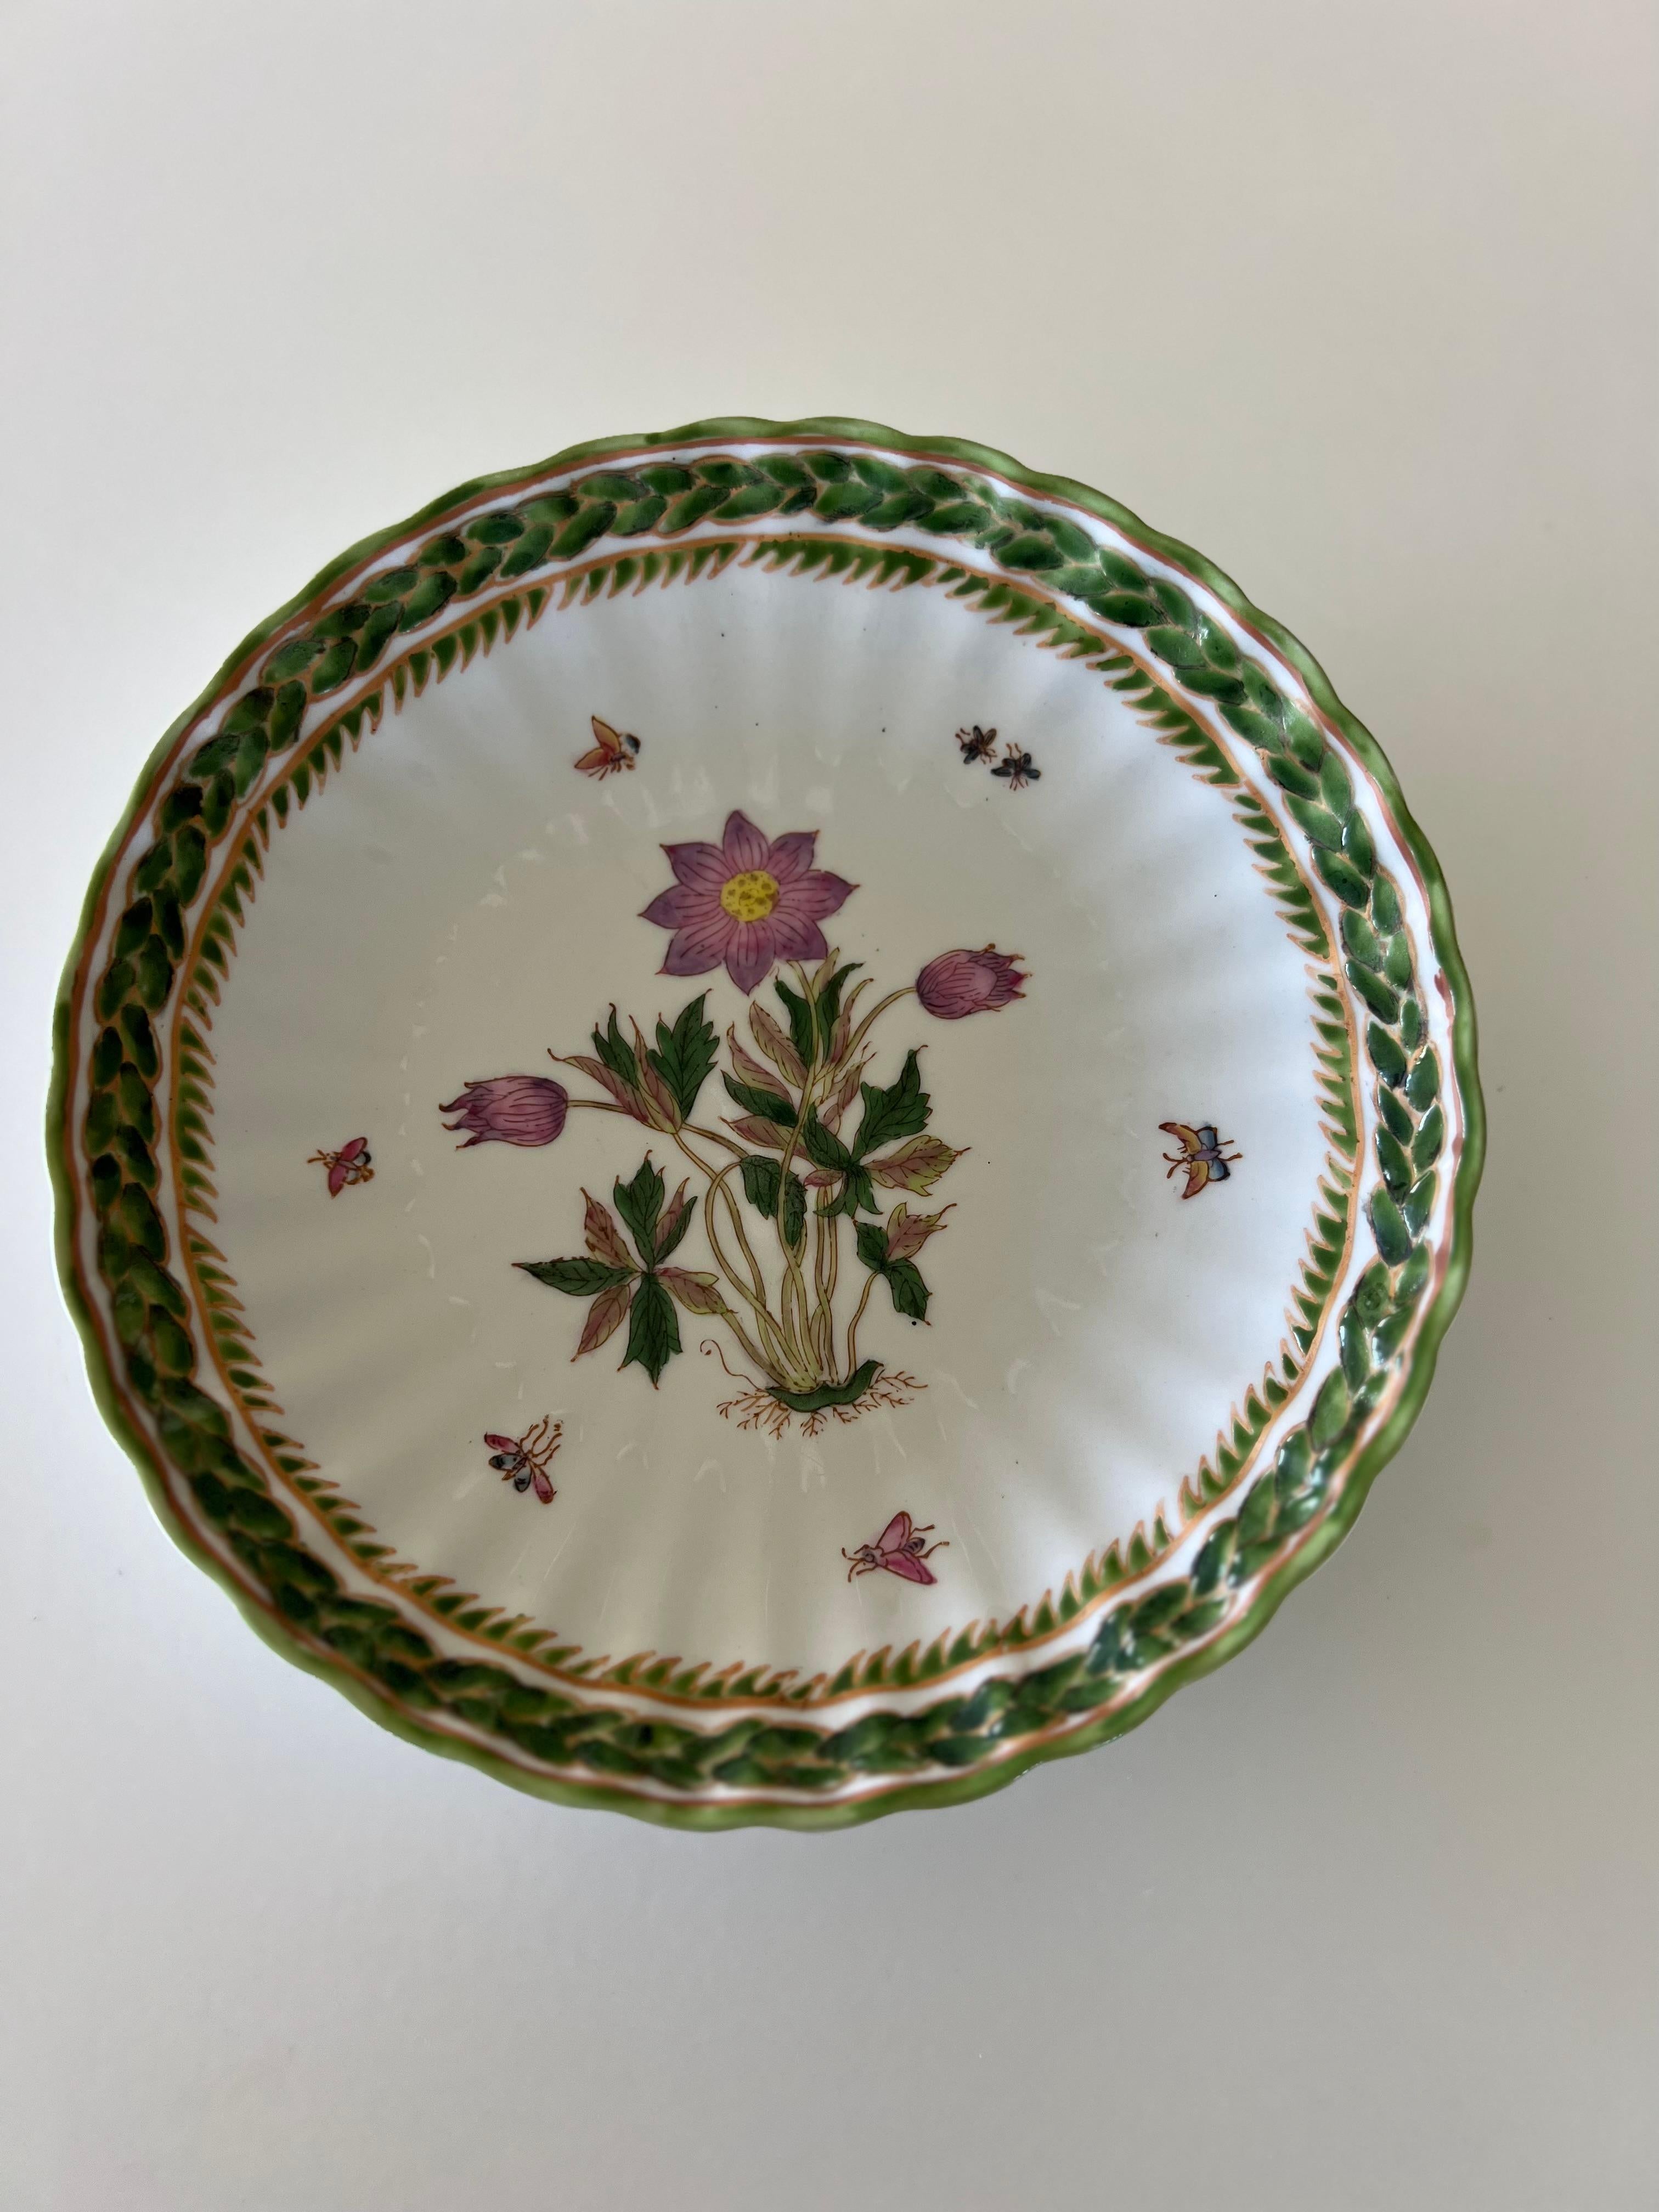 Ceramic Decorative Flower and Vegetation Chinese Plate Signed WL, 1896 For Sale 2